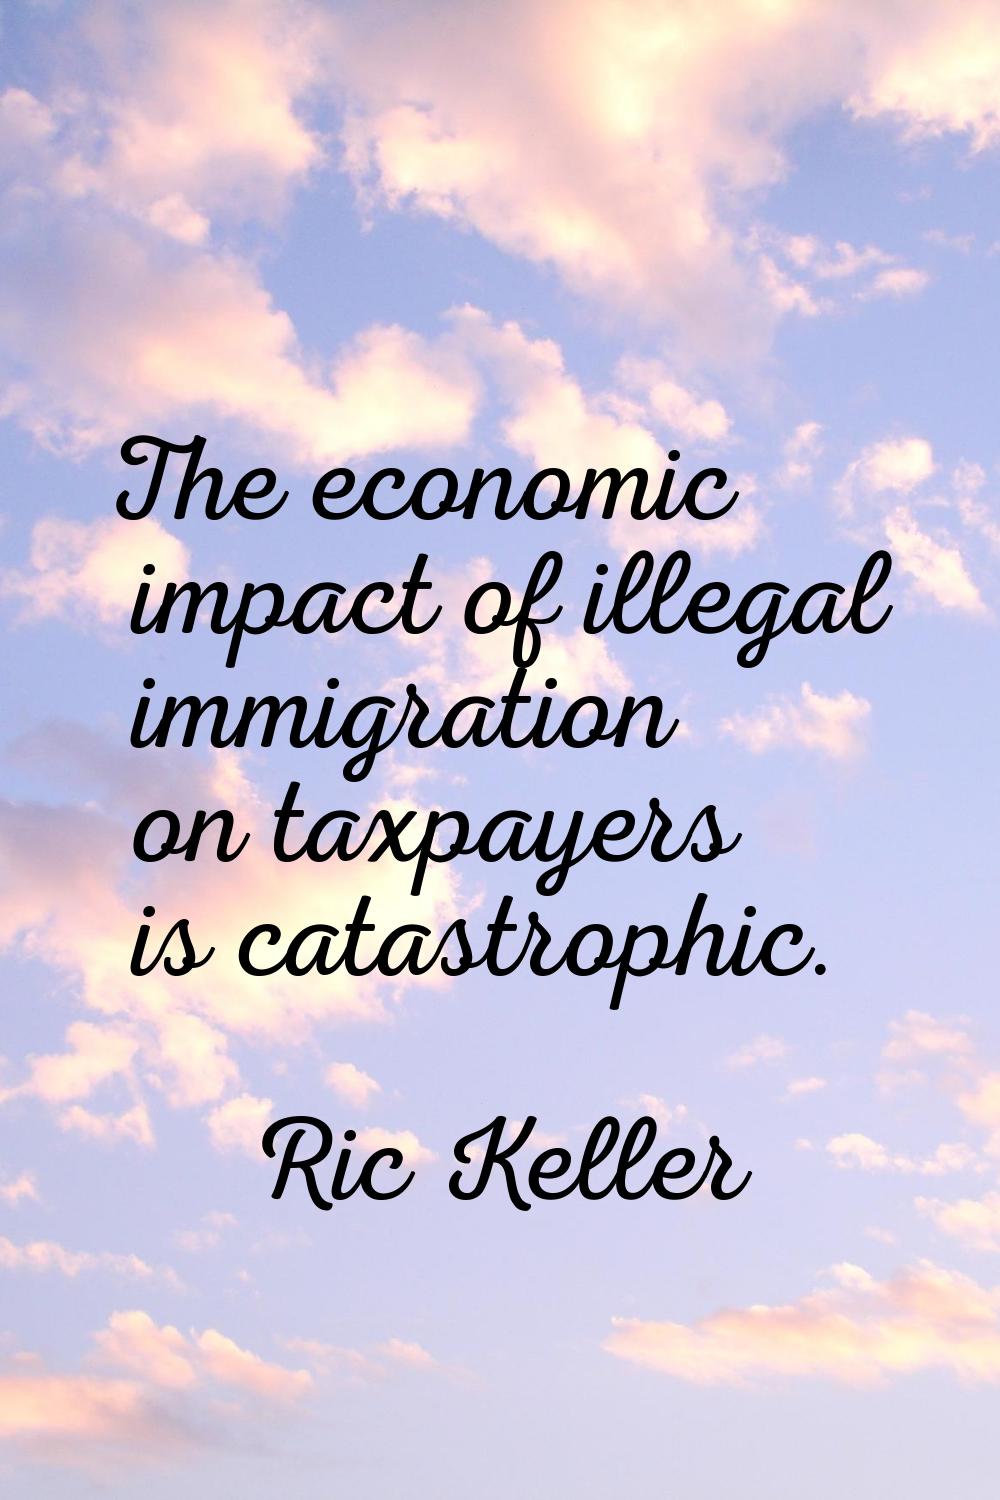 The economic impact of illegal immigration on taxpayers is catastrophic.